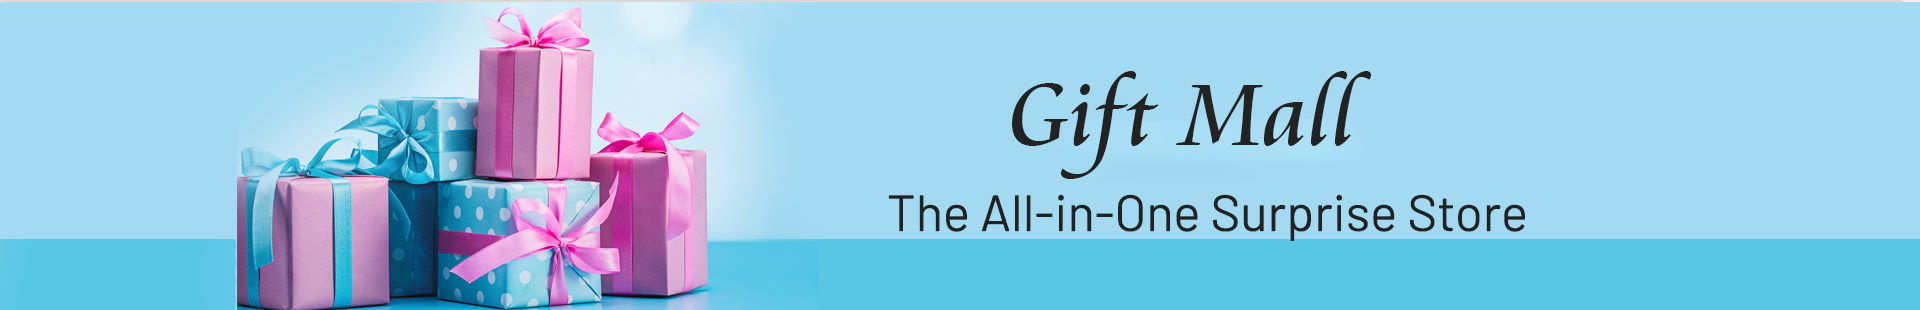 find gifts at one place